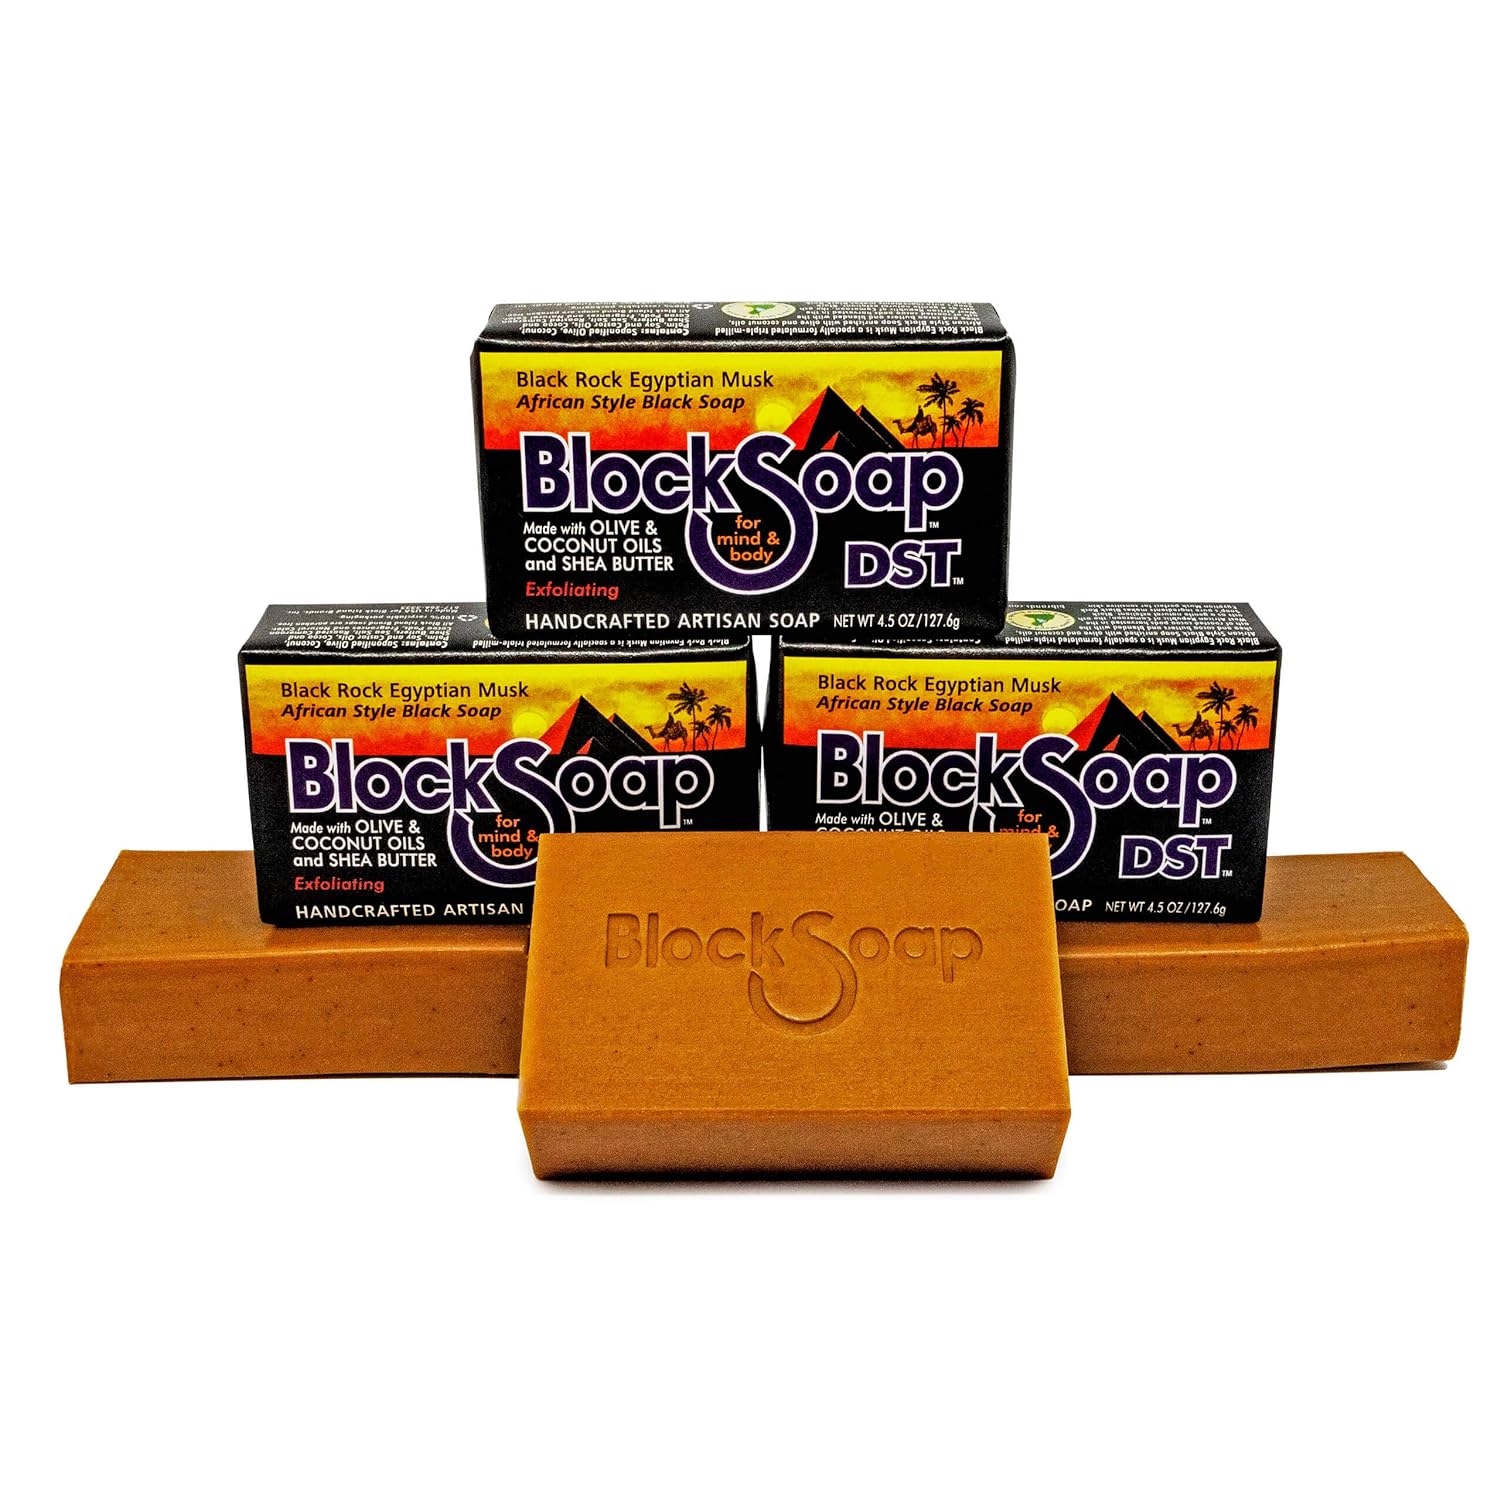 DST For Darker Skin Tones African Style Artisan Black Bar Soap with Sea Salt, Olive Oil, Coconut Oil and Shea Butter - Black Rock Egyptian Musk 3-Pack (4.5 each)